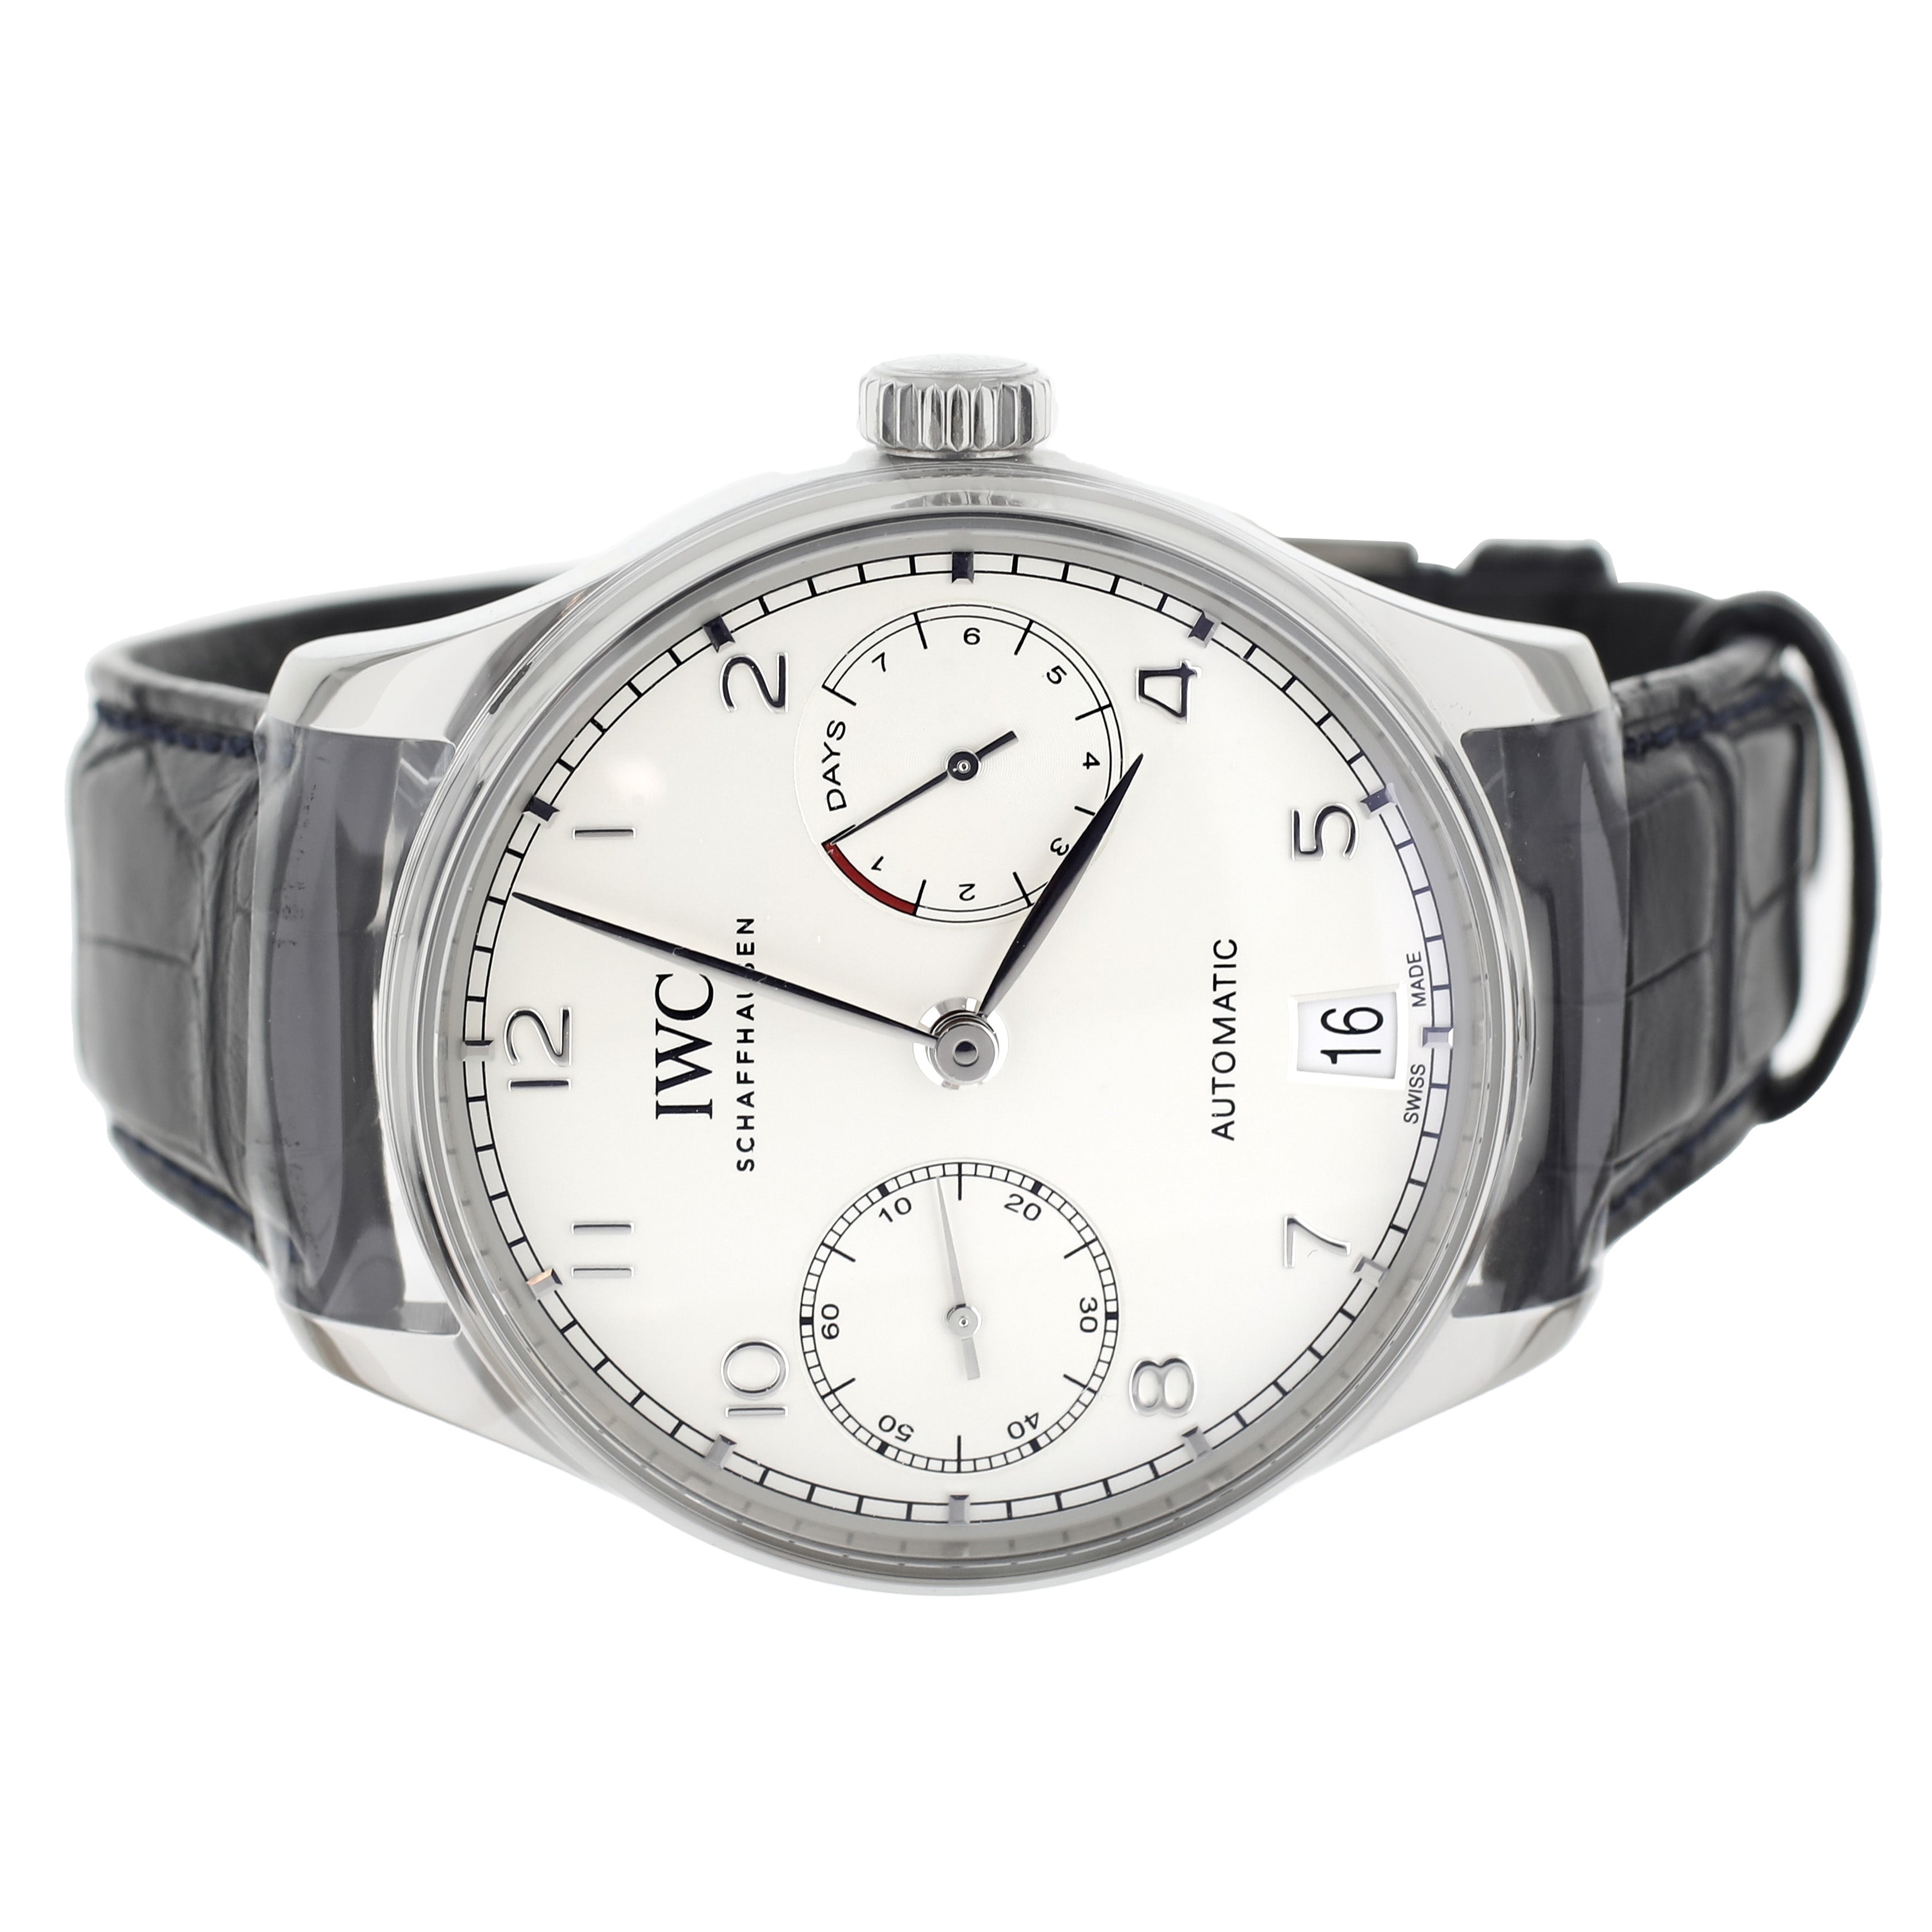 IWC Portugieser Automatic 7 Days Stainless Steel Silver Dial Alligator IW500712